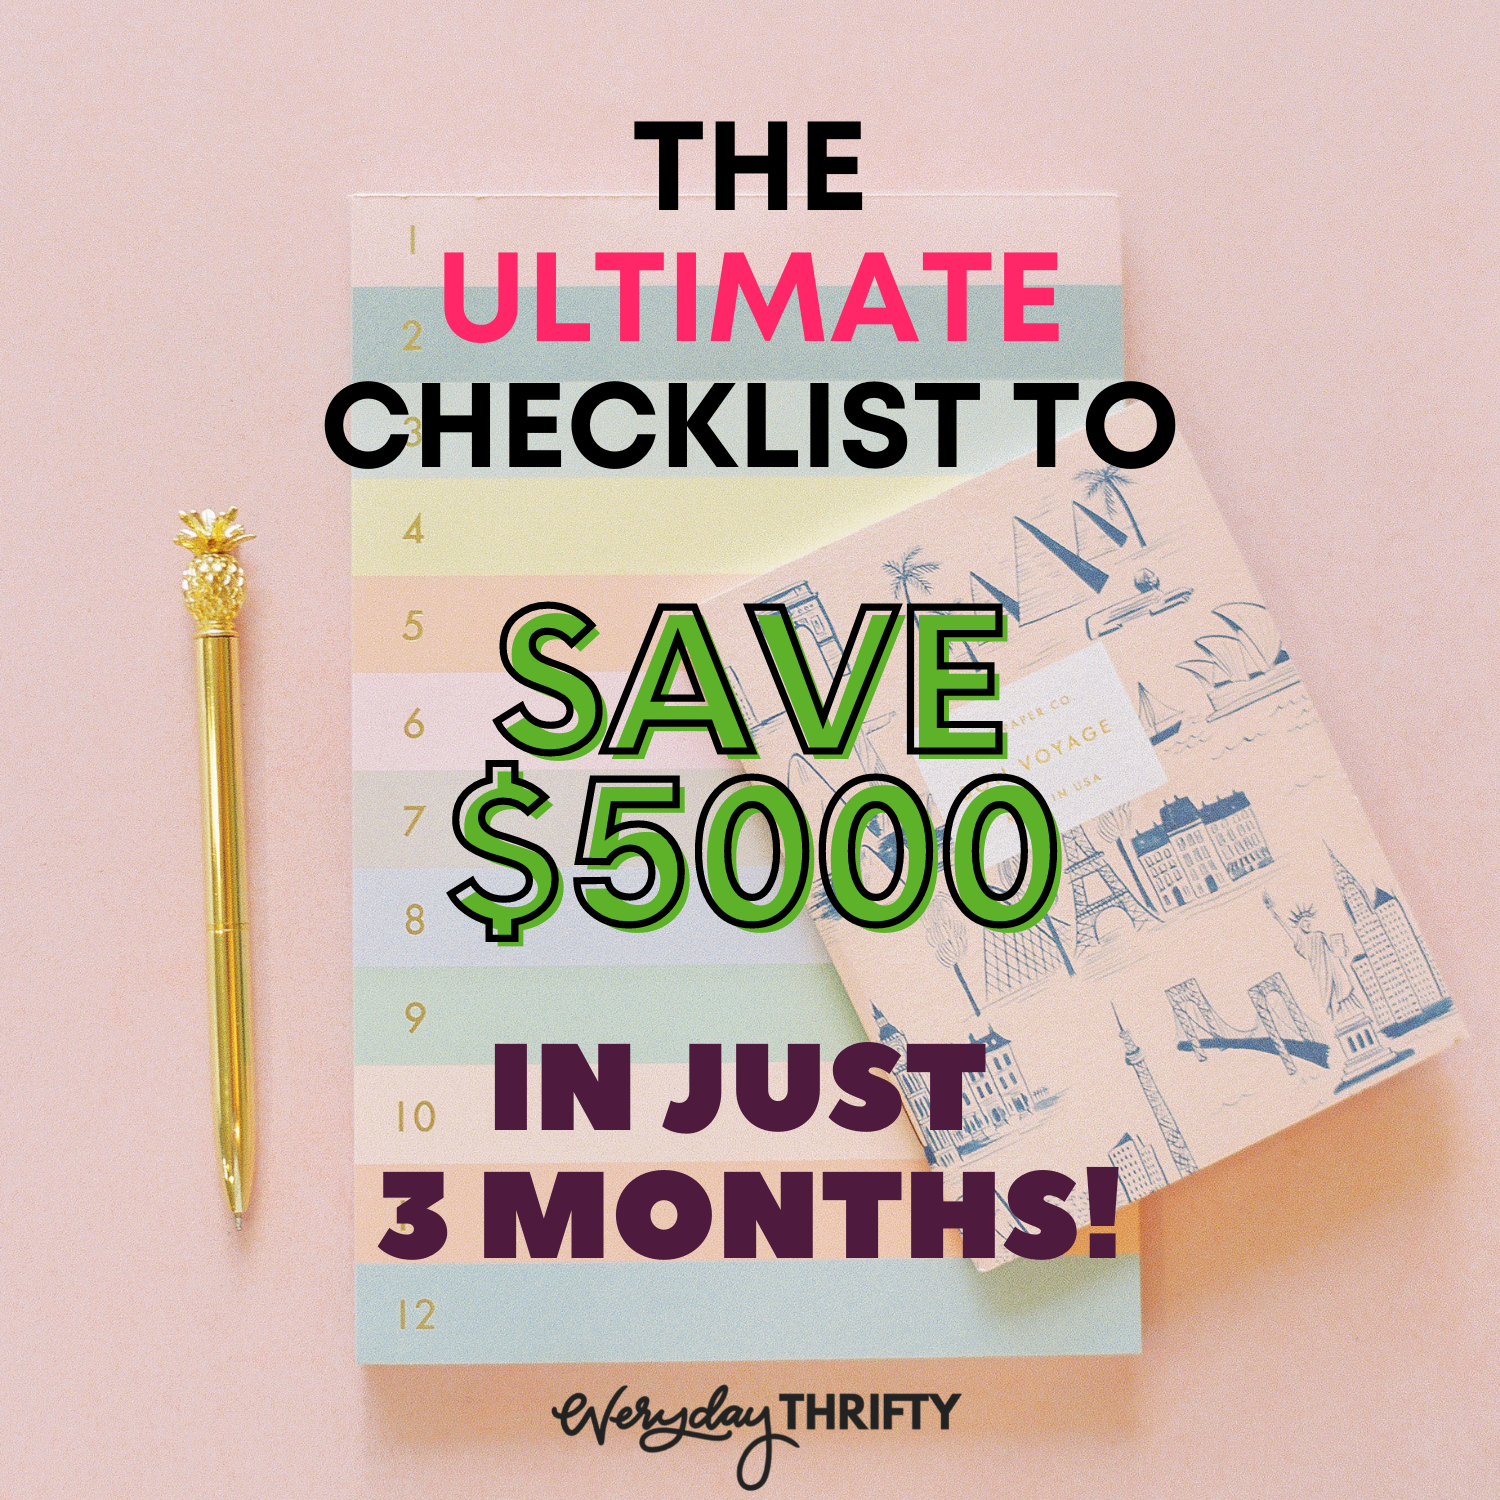 How to save $5000 in 3 months?